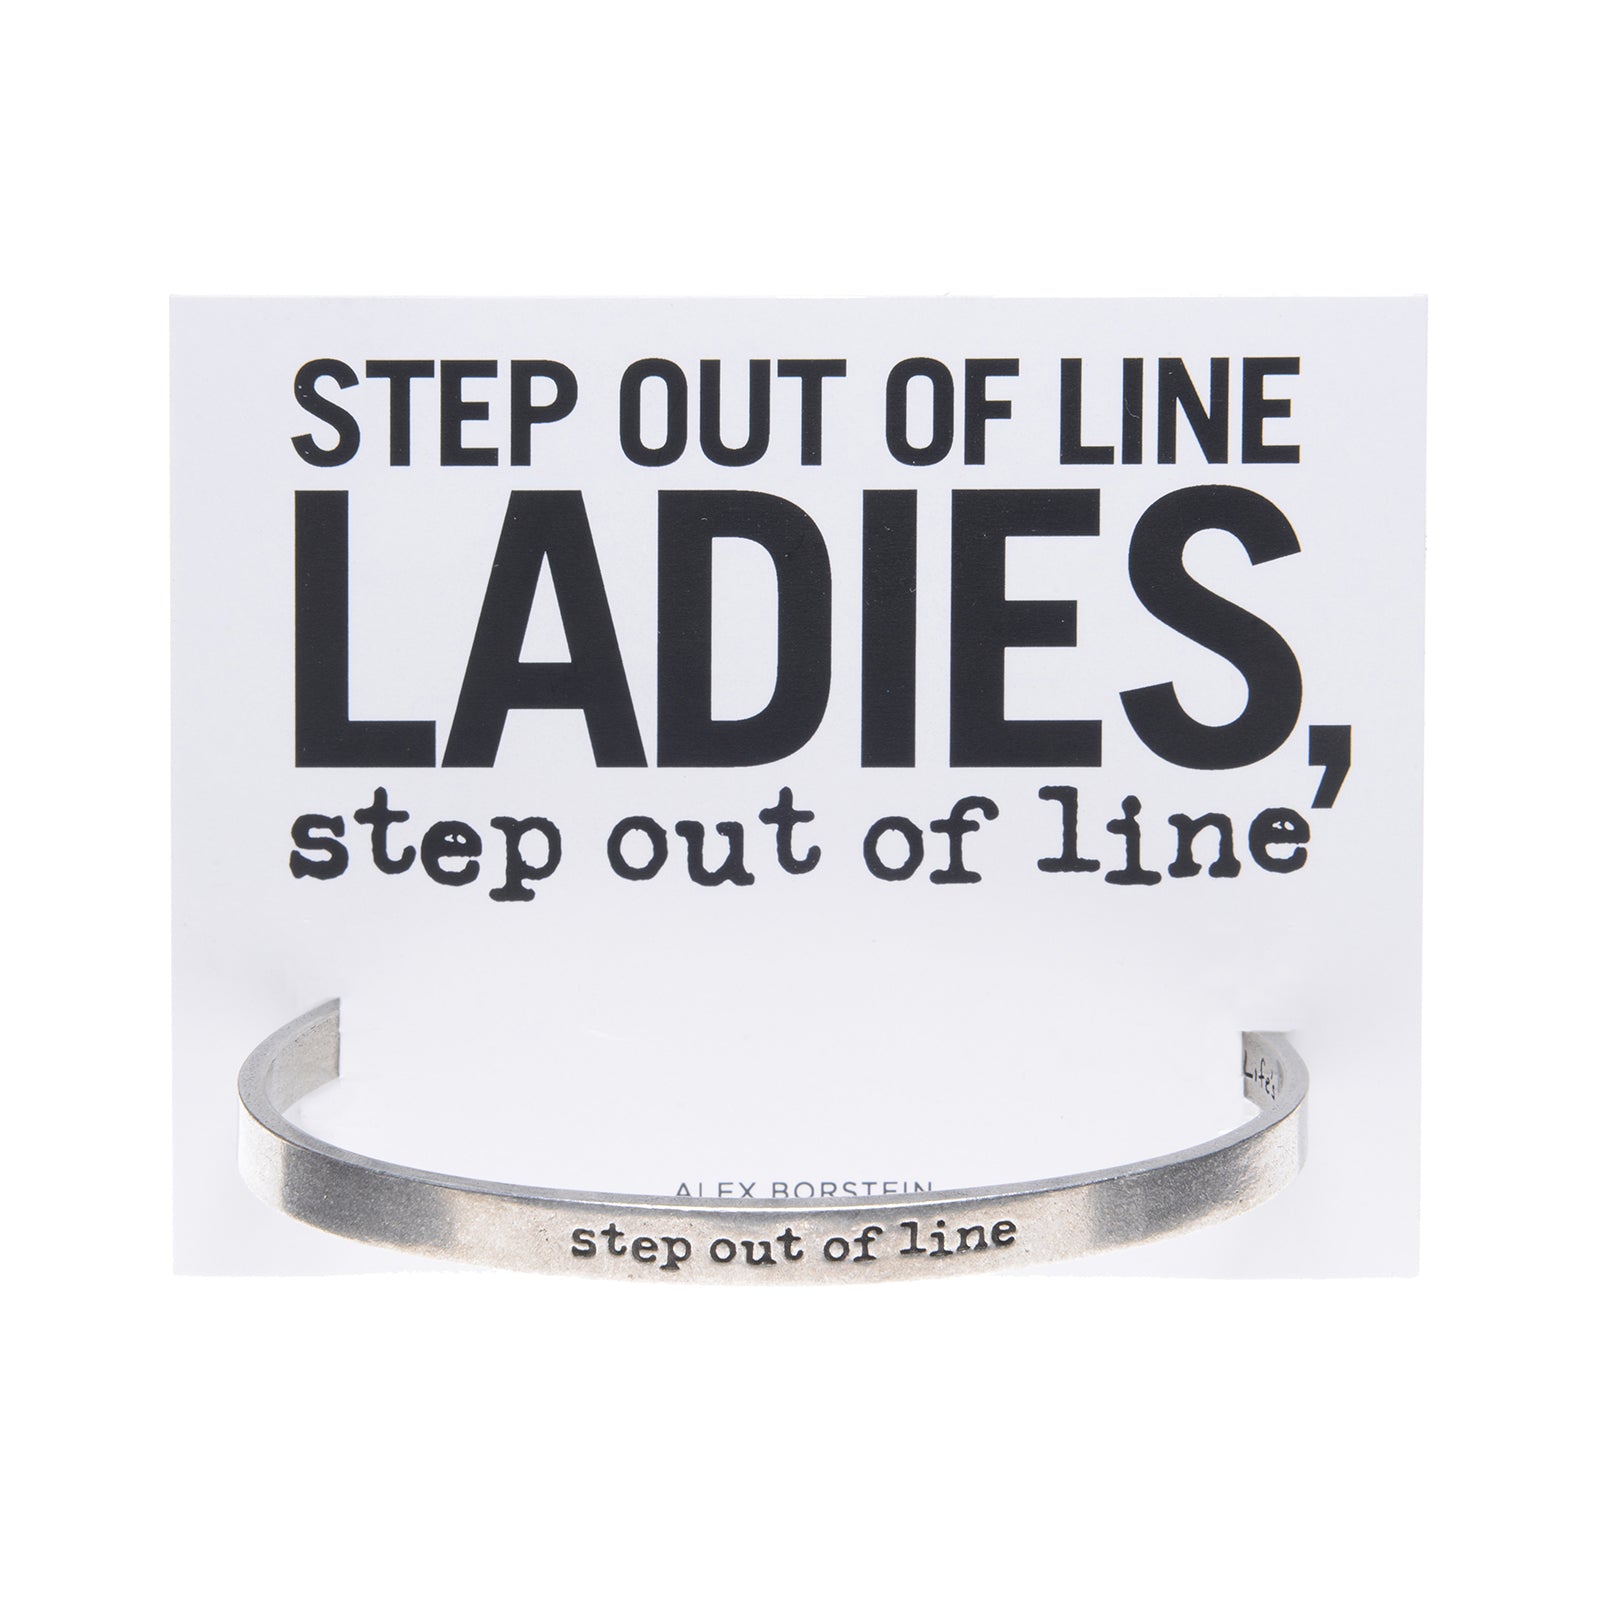 Step out of Line - Alex Borstein Quotable Cuff Bracelet on backer card